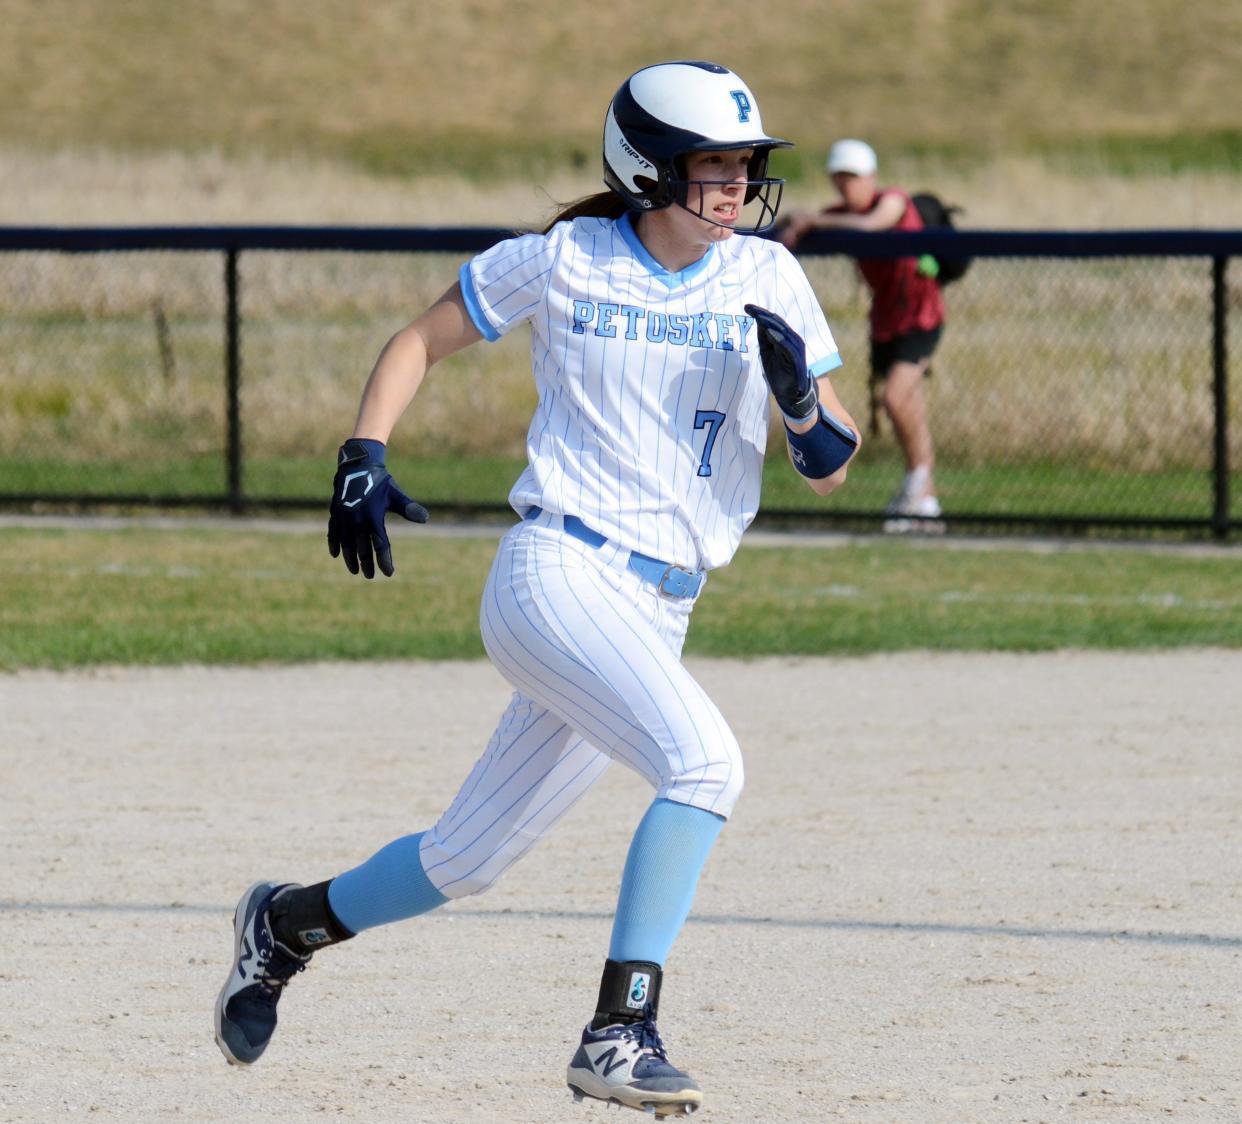 With 22 extra-base hits this season, Petoskey's Kenzie Bromley was just thinking single when her bat met the ball.